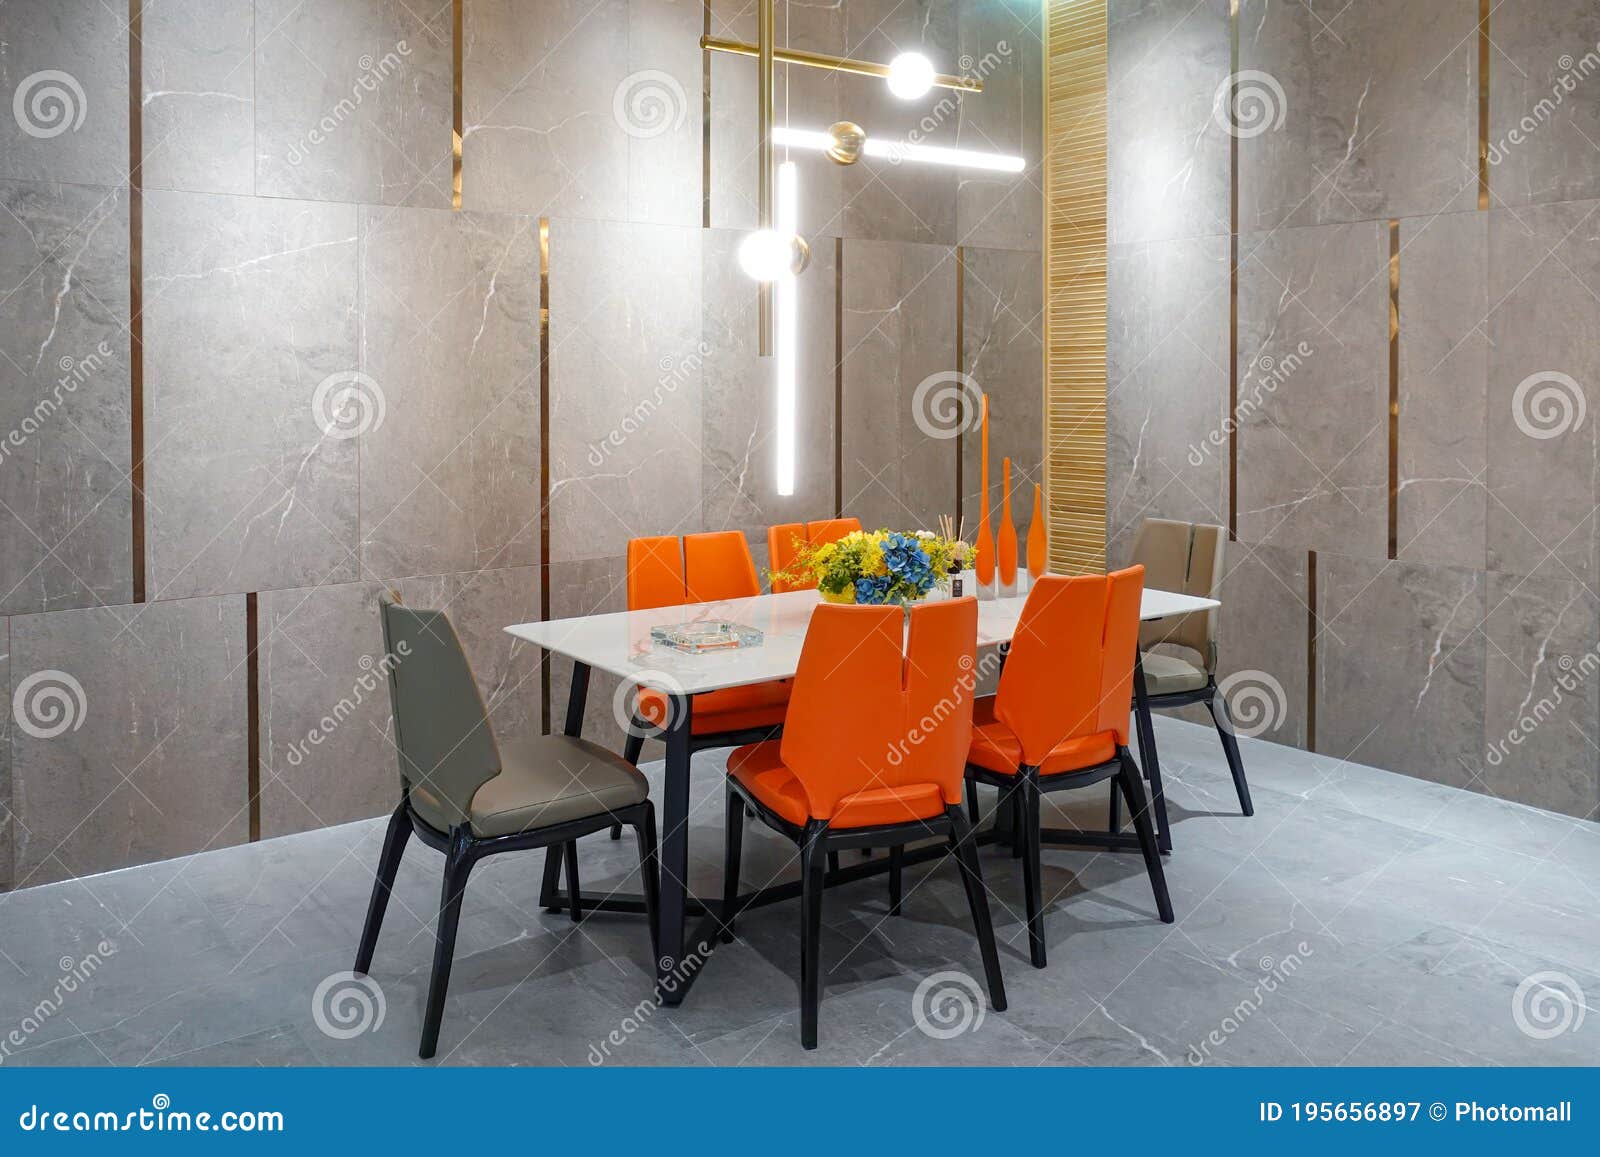 modern dining room luxury furniture home appliance fitment